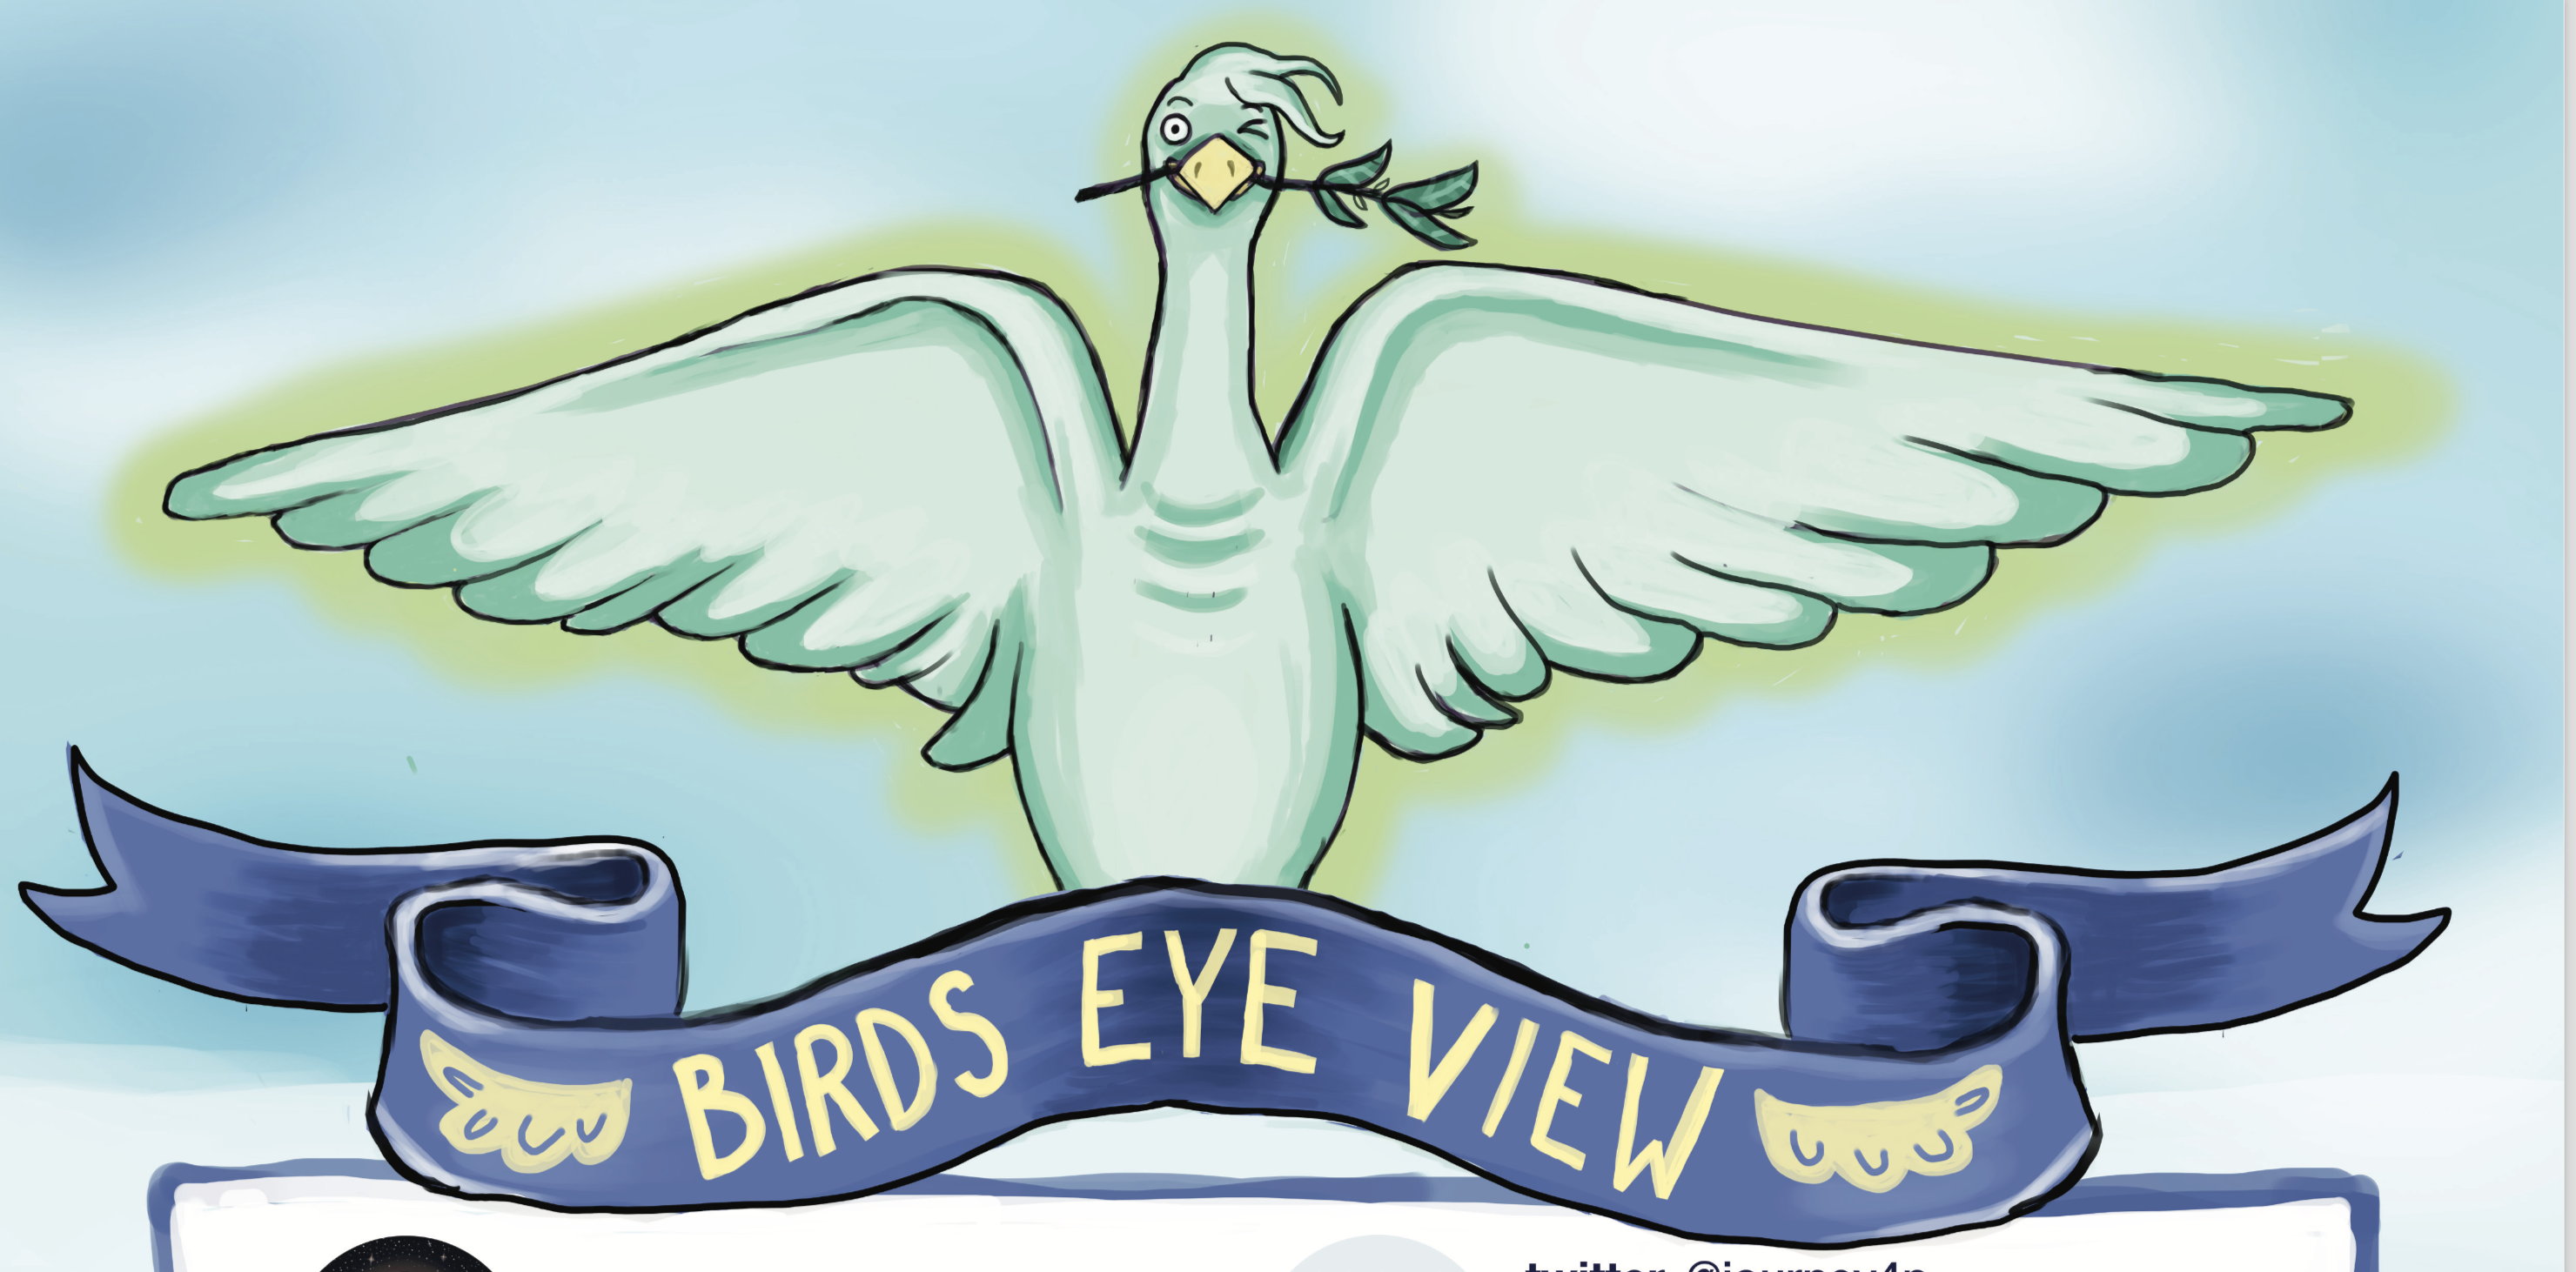 cartoon image of a liver bird looking at the viewer with a blue banner underneath saying BIRDS EYE VIEW